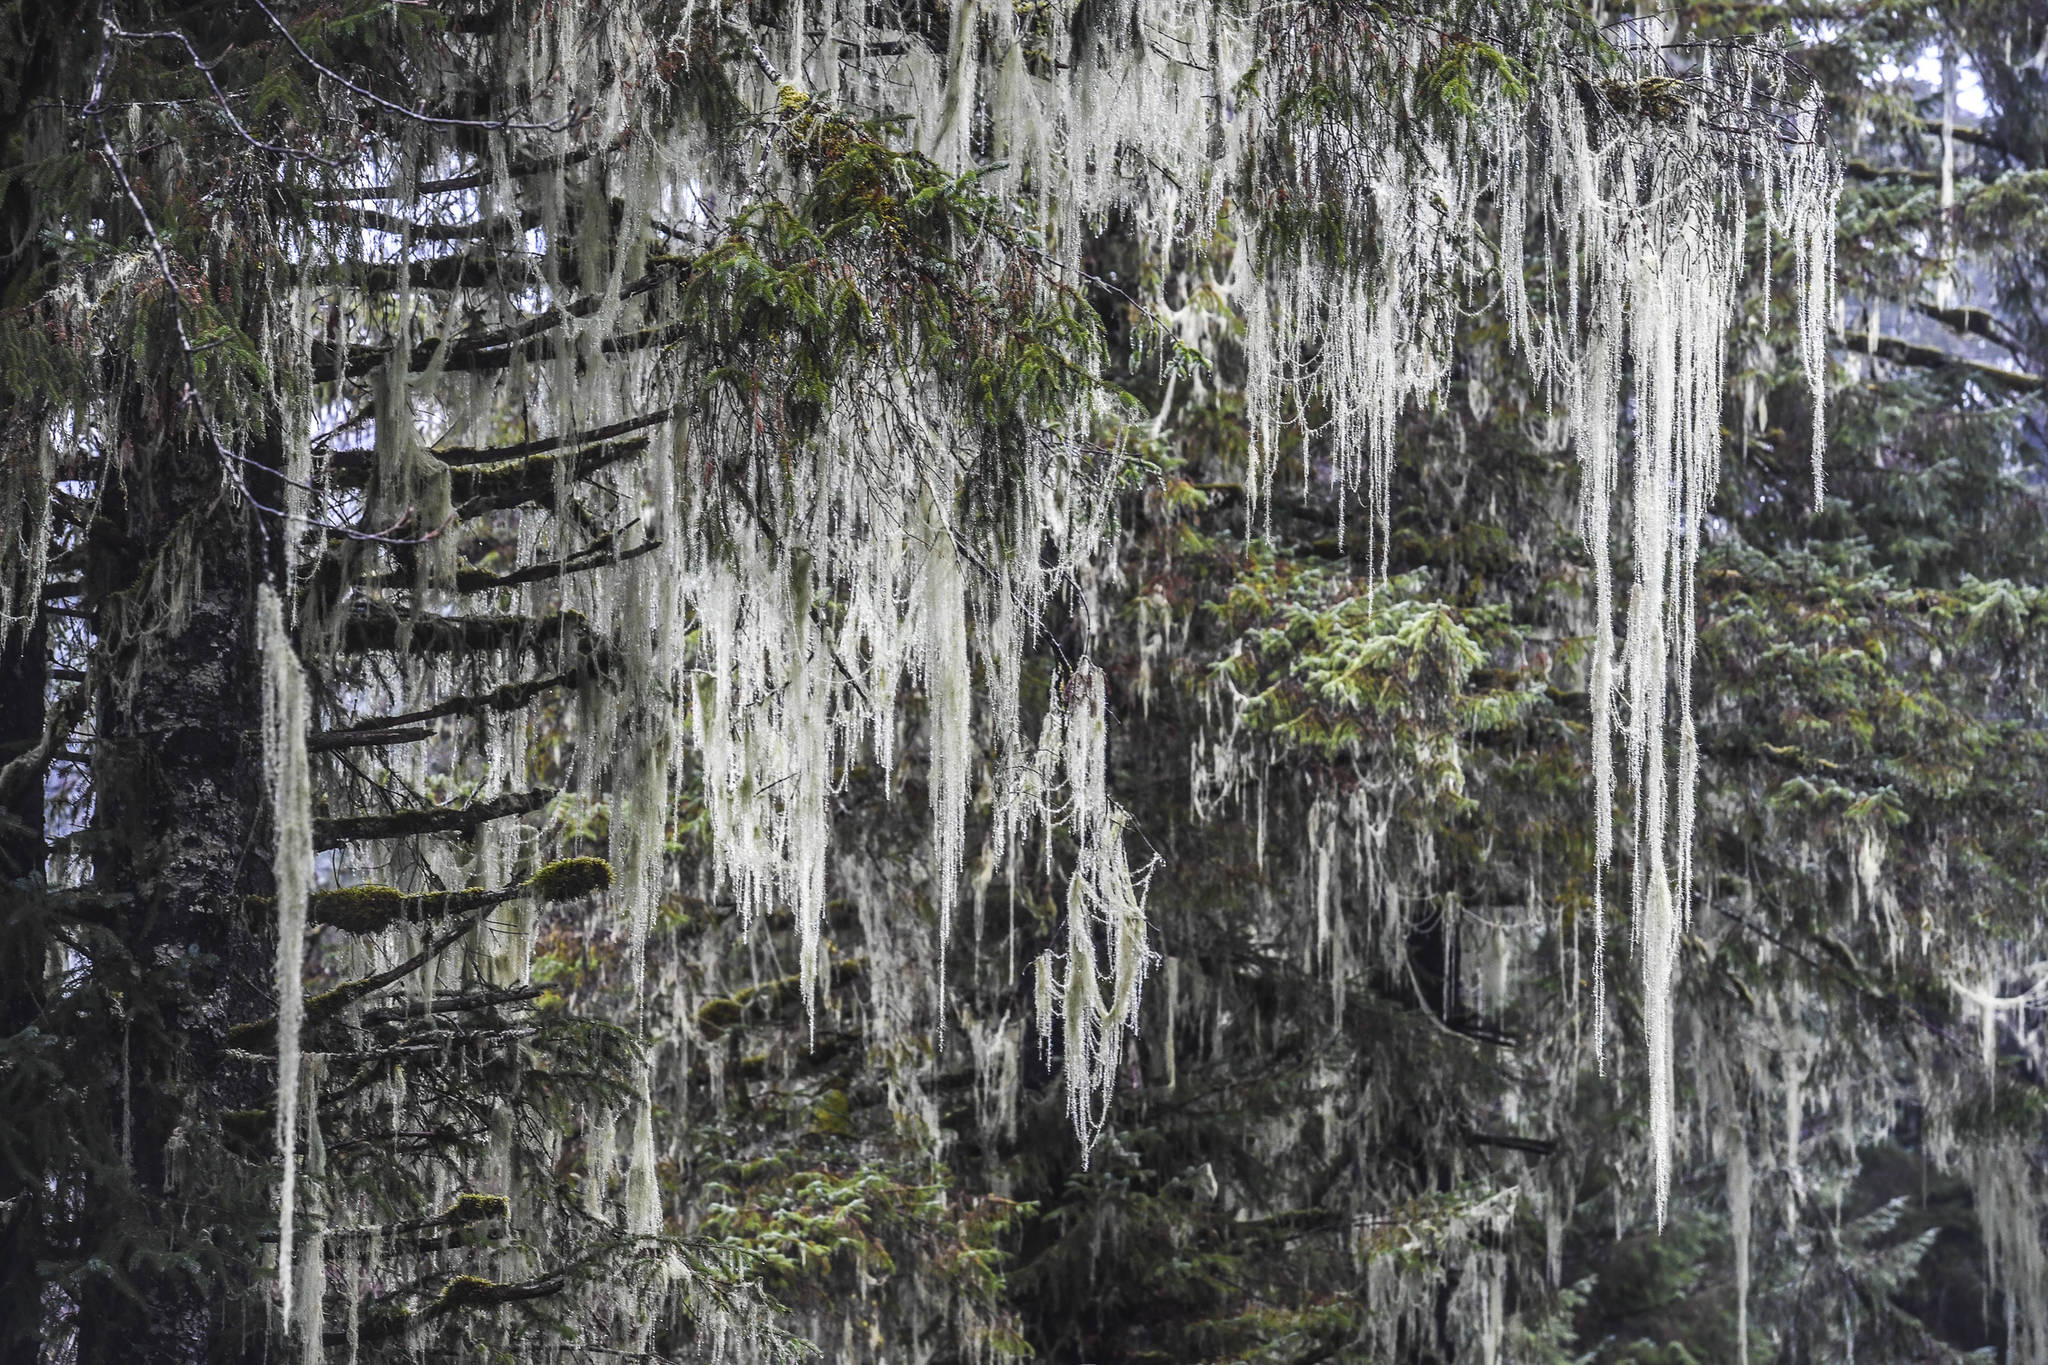 Usnea, better known as Old Man’s Beard, hangs from trees in the Tongass National Forest on Monday, Dec. 9, 2019. (Michael Penn | Juneau Empire)